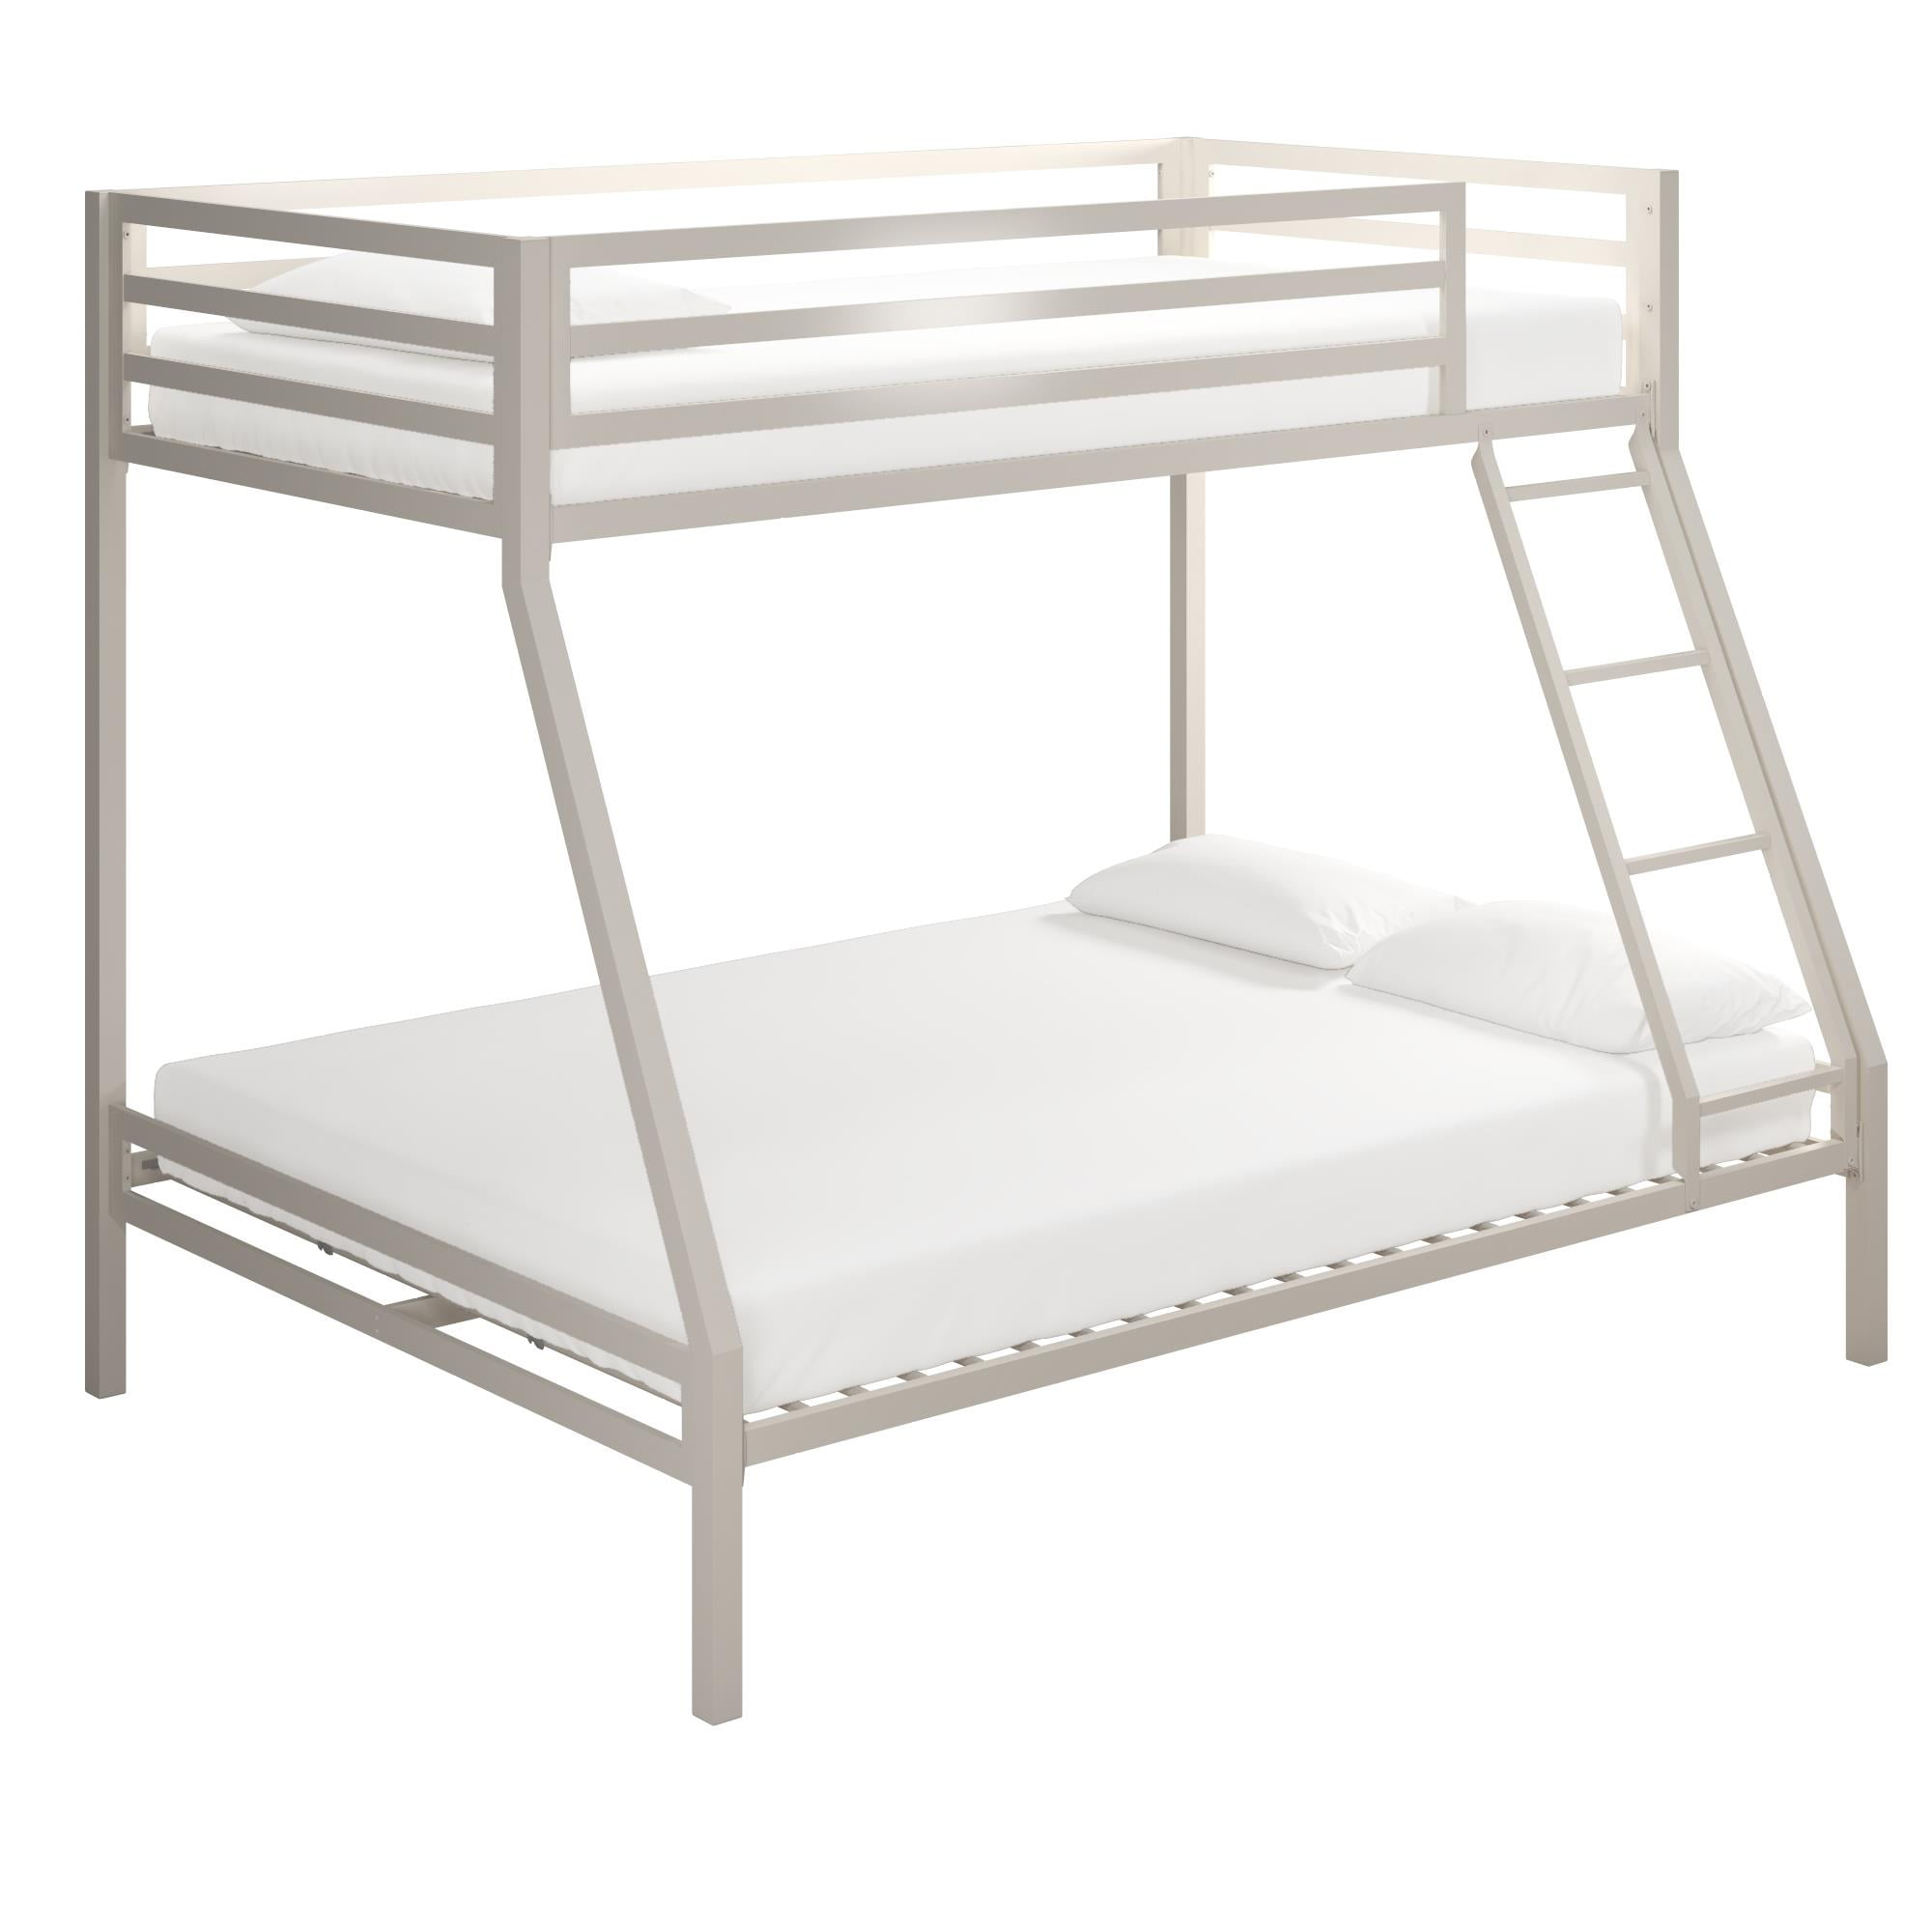 Mainstays Premium Twin Over Full Bunk Bed, Mainstays Twin Bunk Bed Instructions